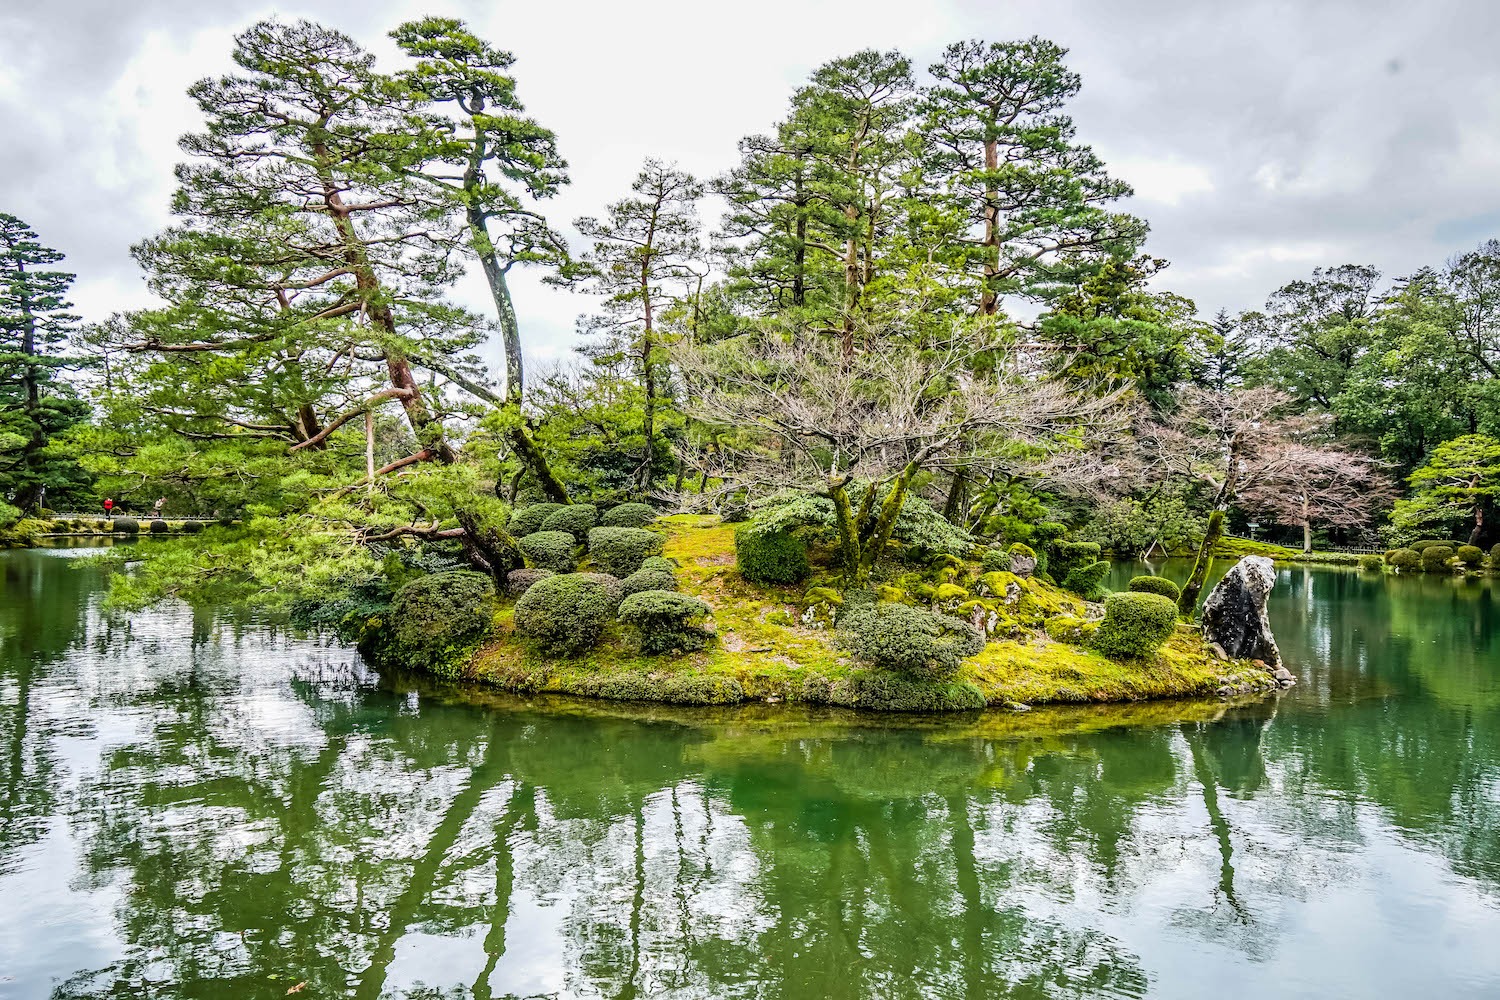 Why The Kanazawa Gardens Needs To Be On Your Japan Bucket-List!